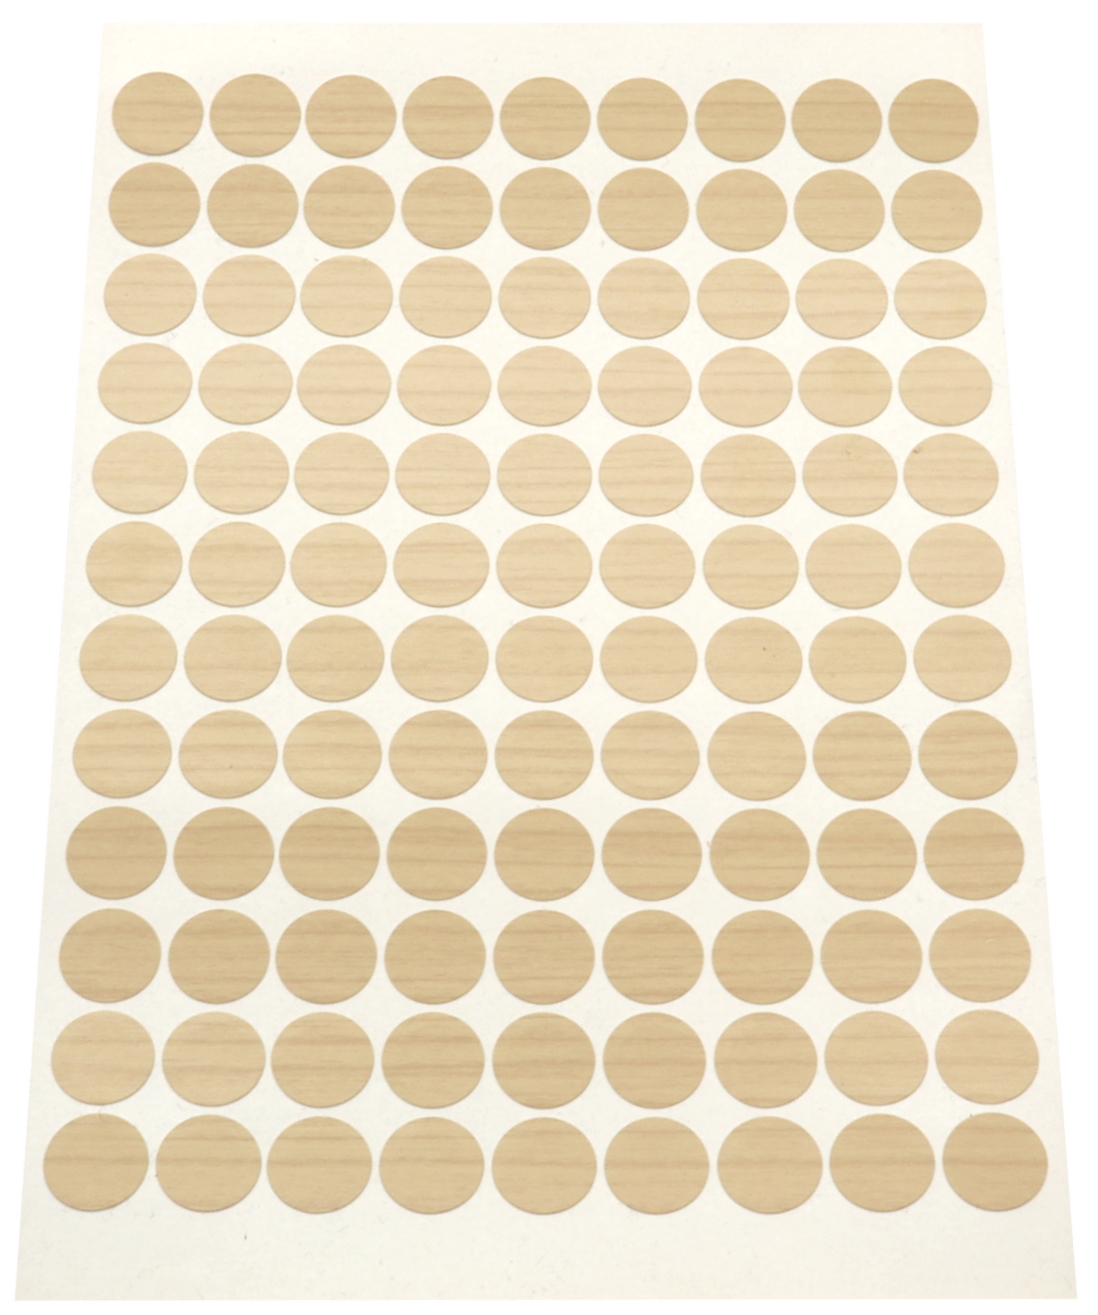 Image Adhesive PVC screw cover, maple finish (sheet of 108 stickers), 14 mm diameter